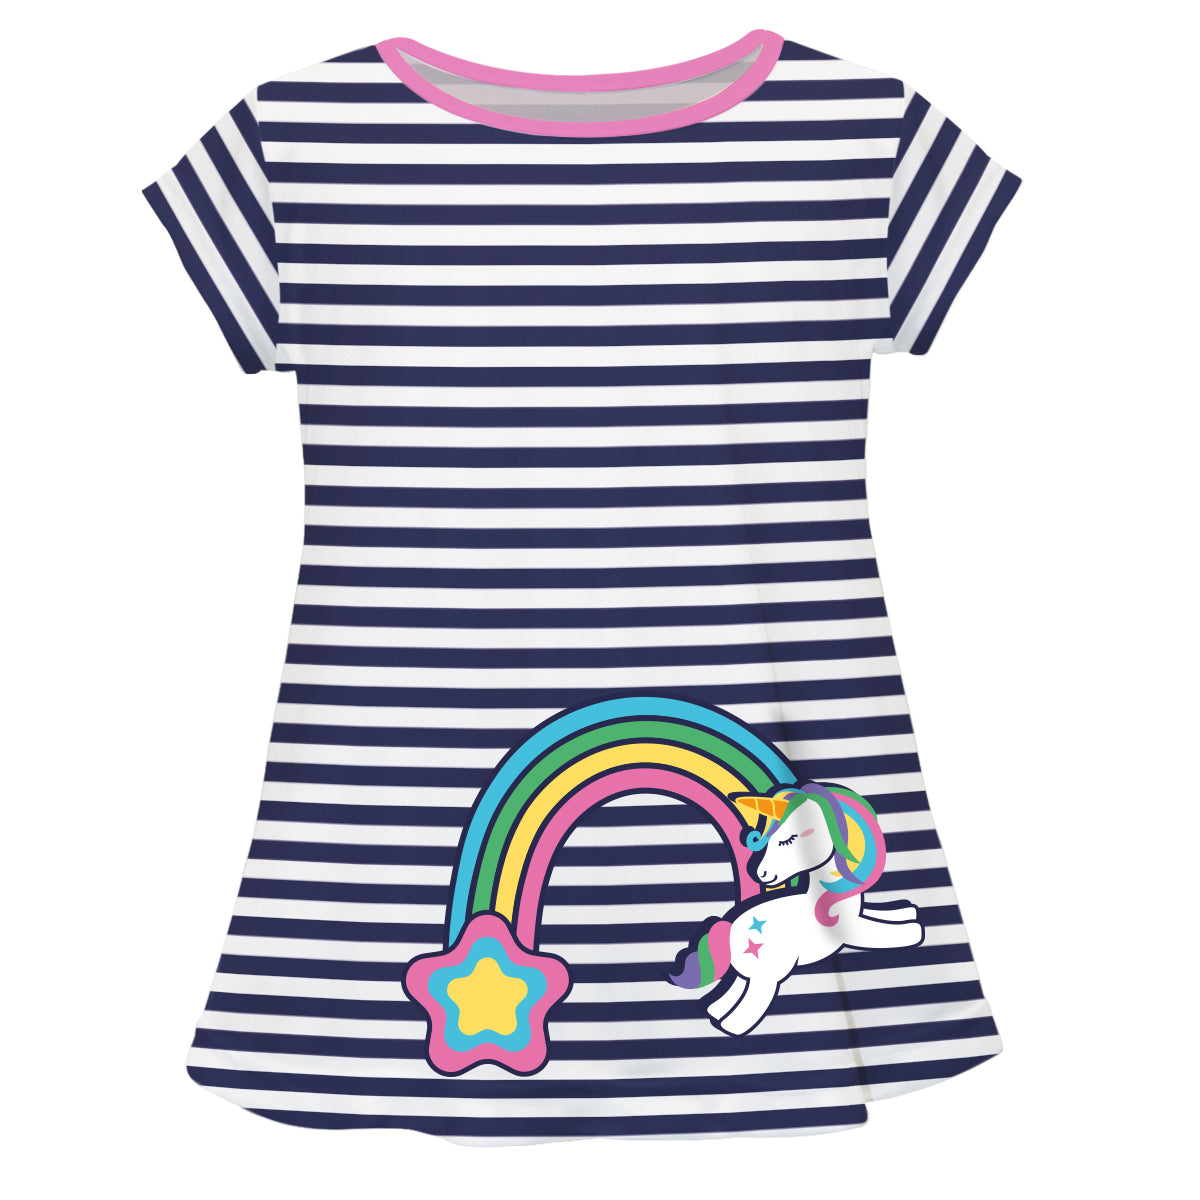 Rainbow Stripes Navy And White Short Sleeve Laurie Top - Wimziy&Co.